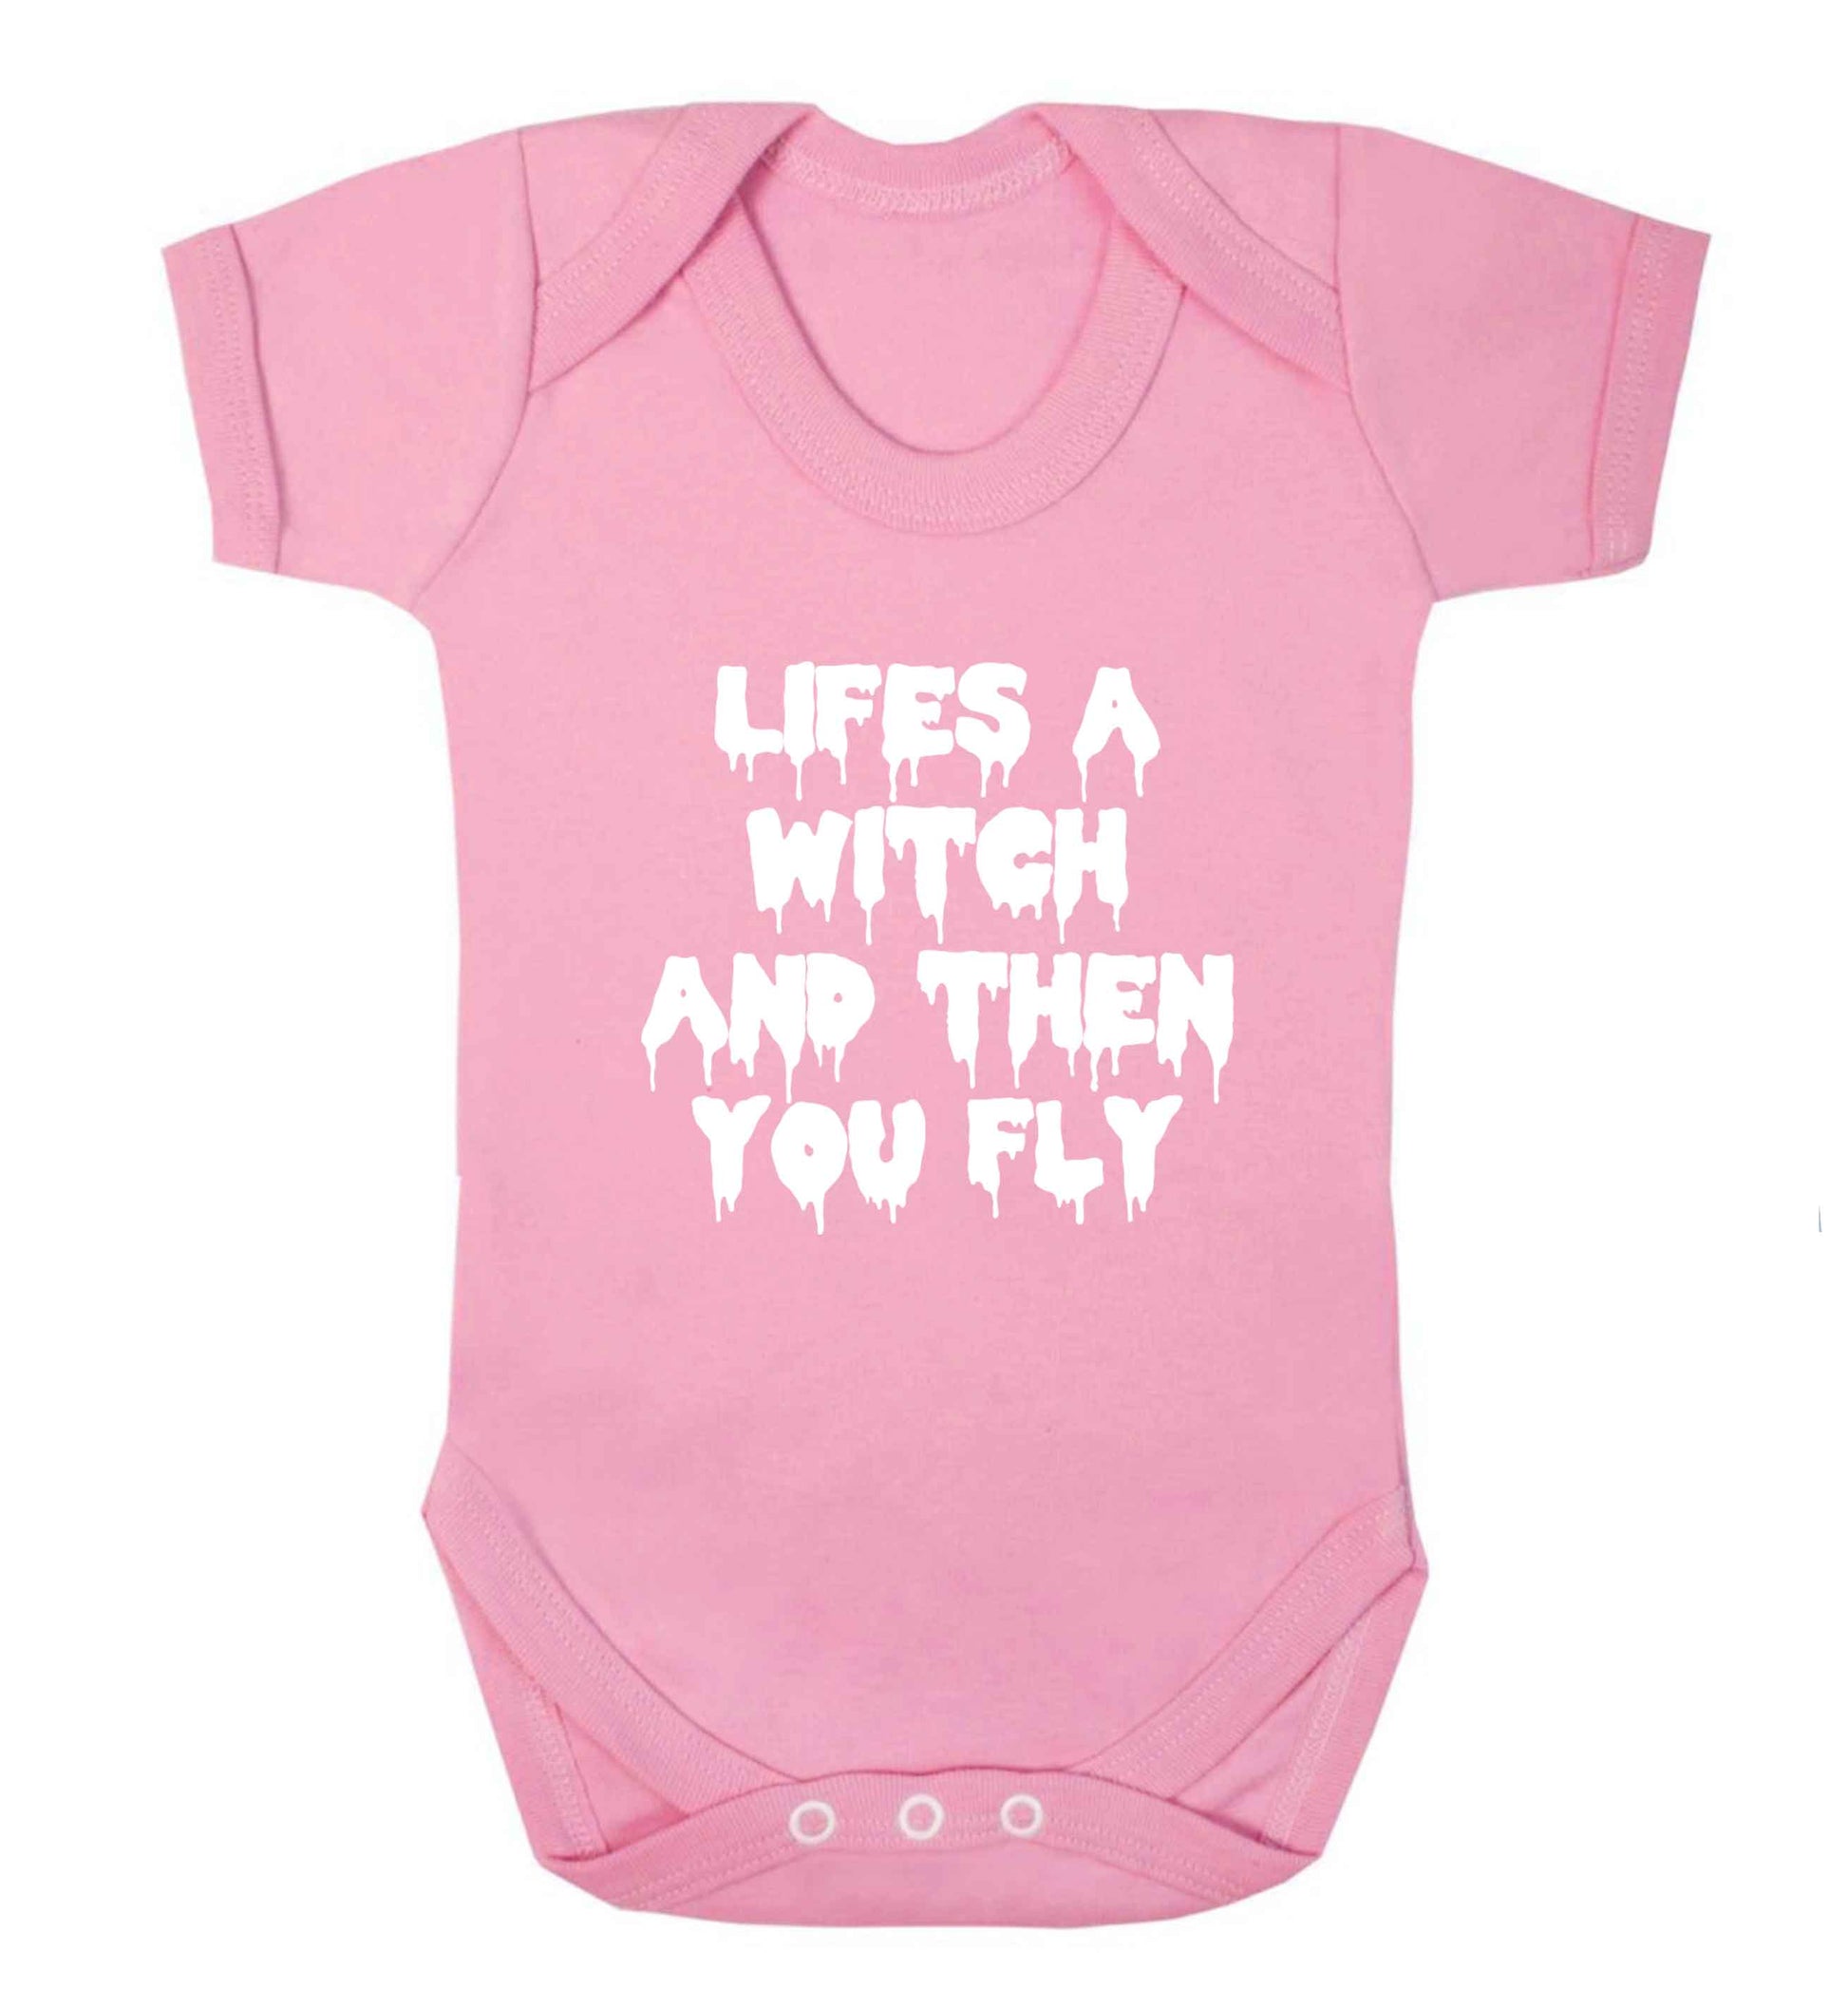 Life's a witch and then you fly baby vest pale pink 18-24 months